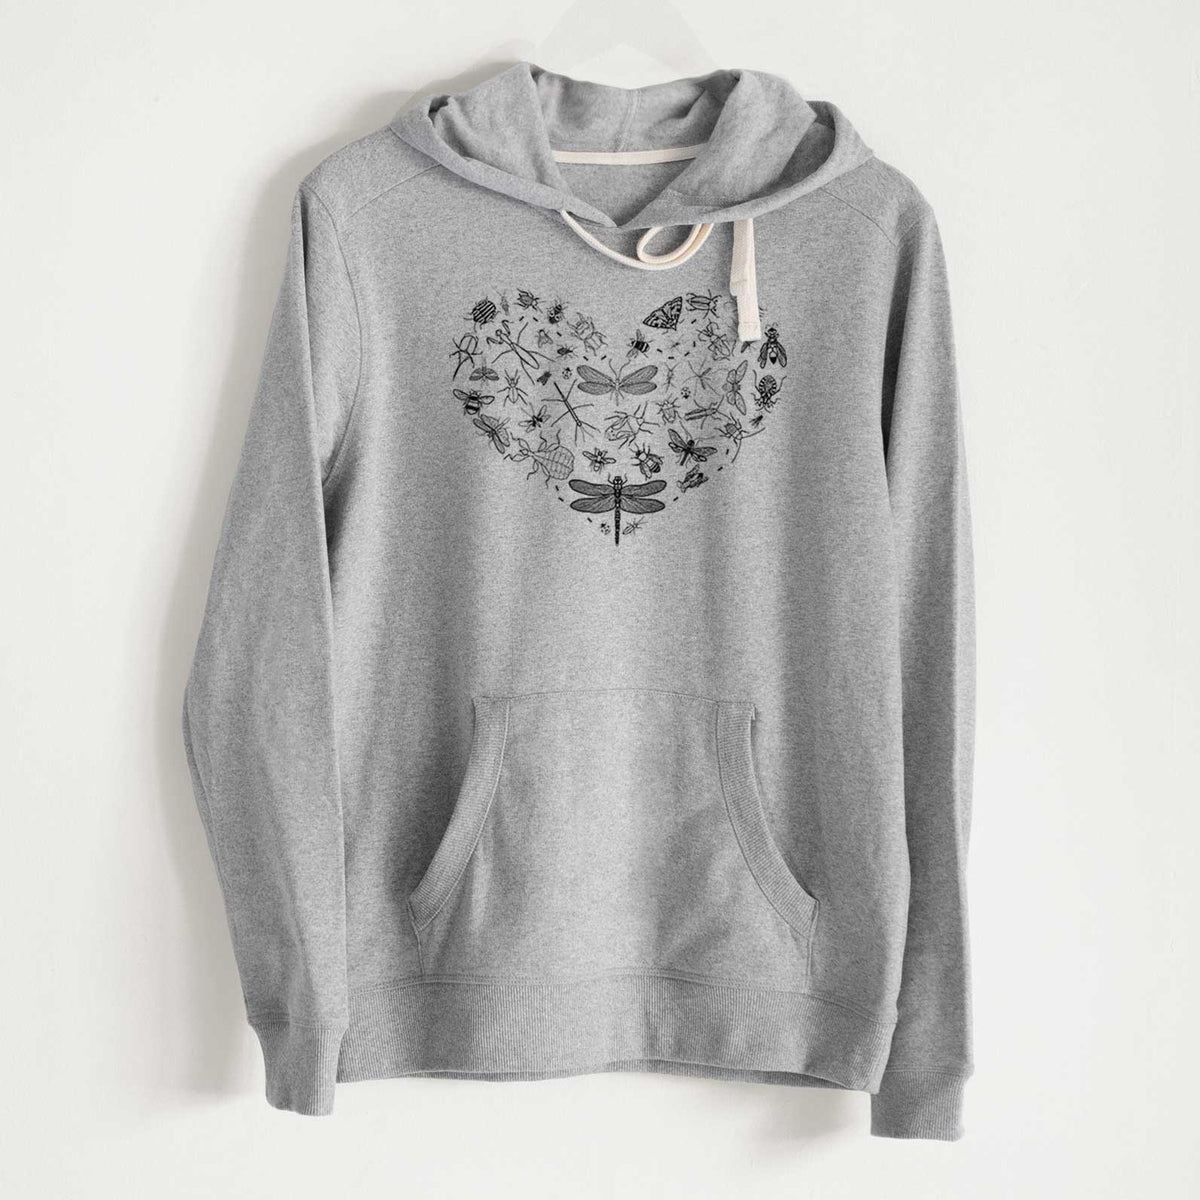 Heart Full of Insects - Unisex Recycled Hoodie - CLOSEOUT - FINAL SALE